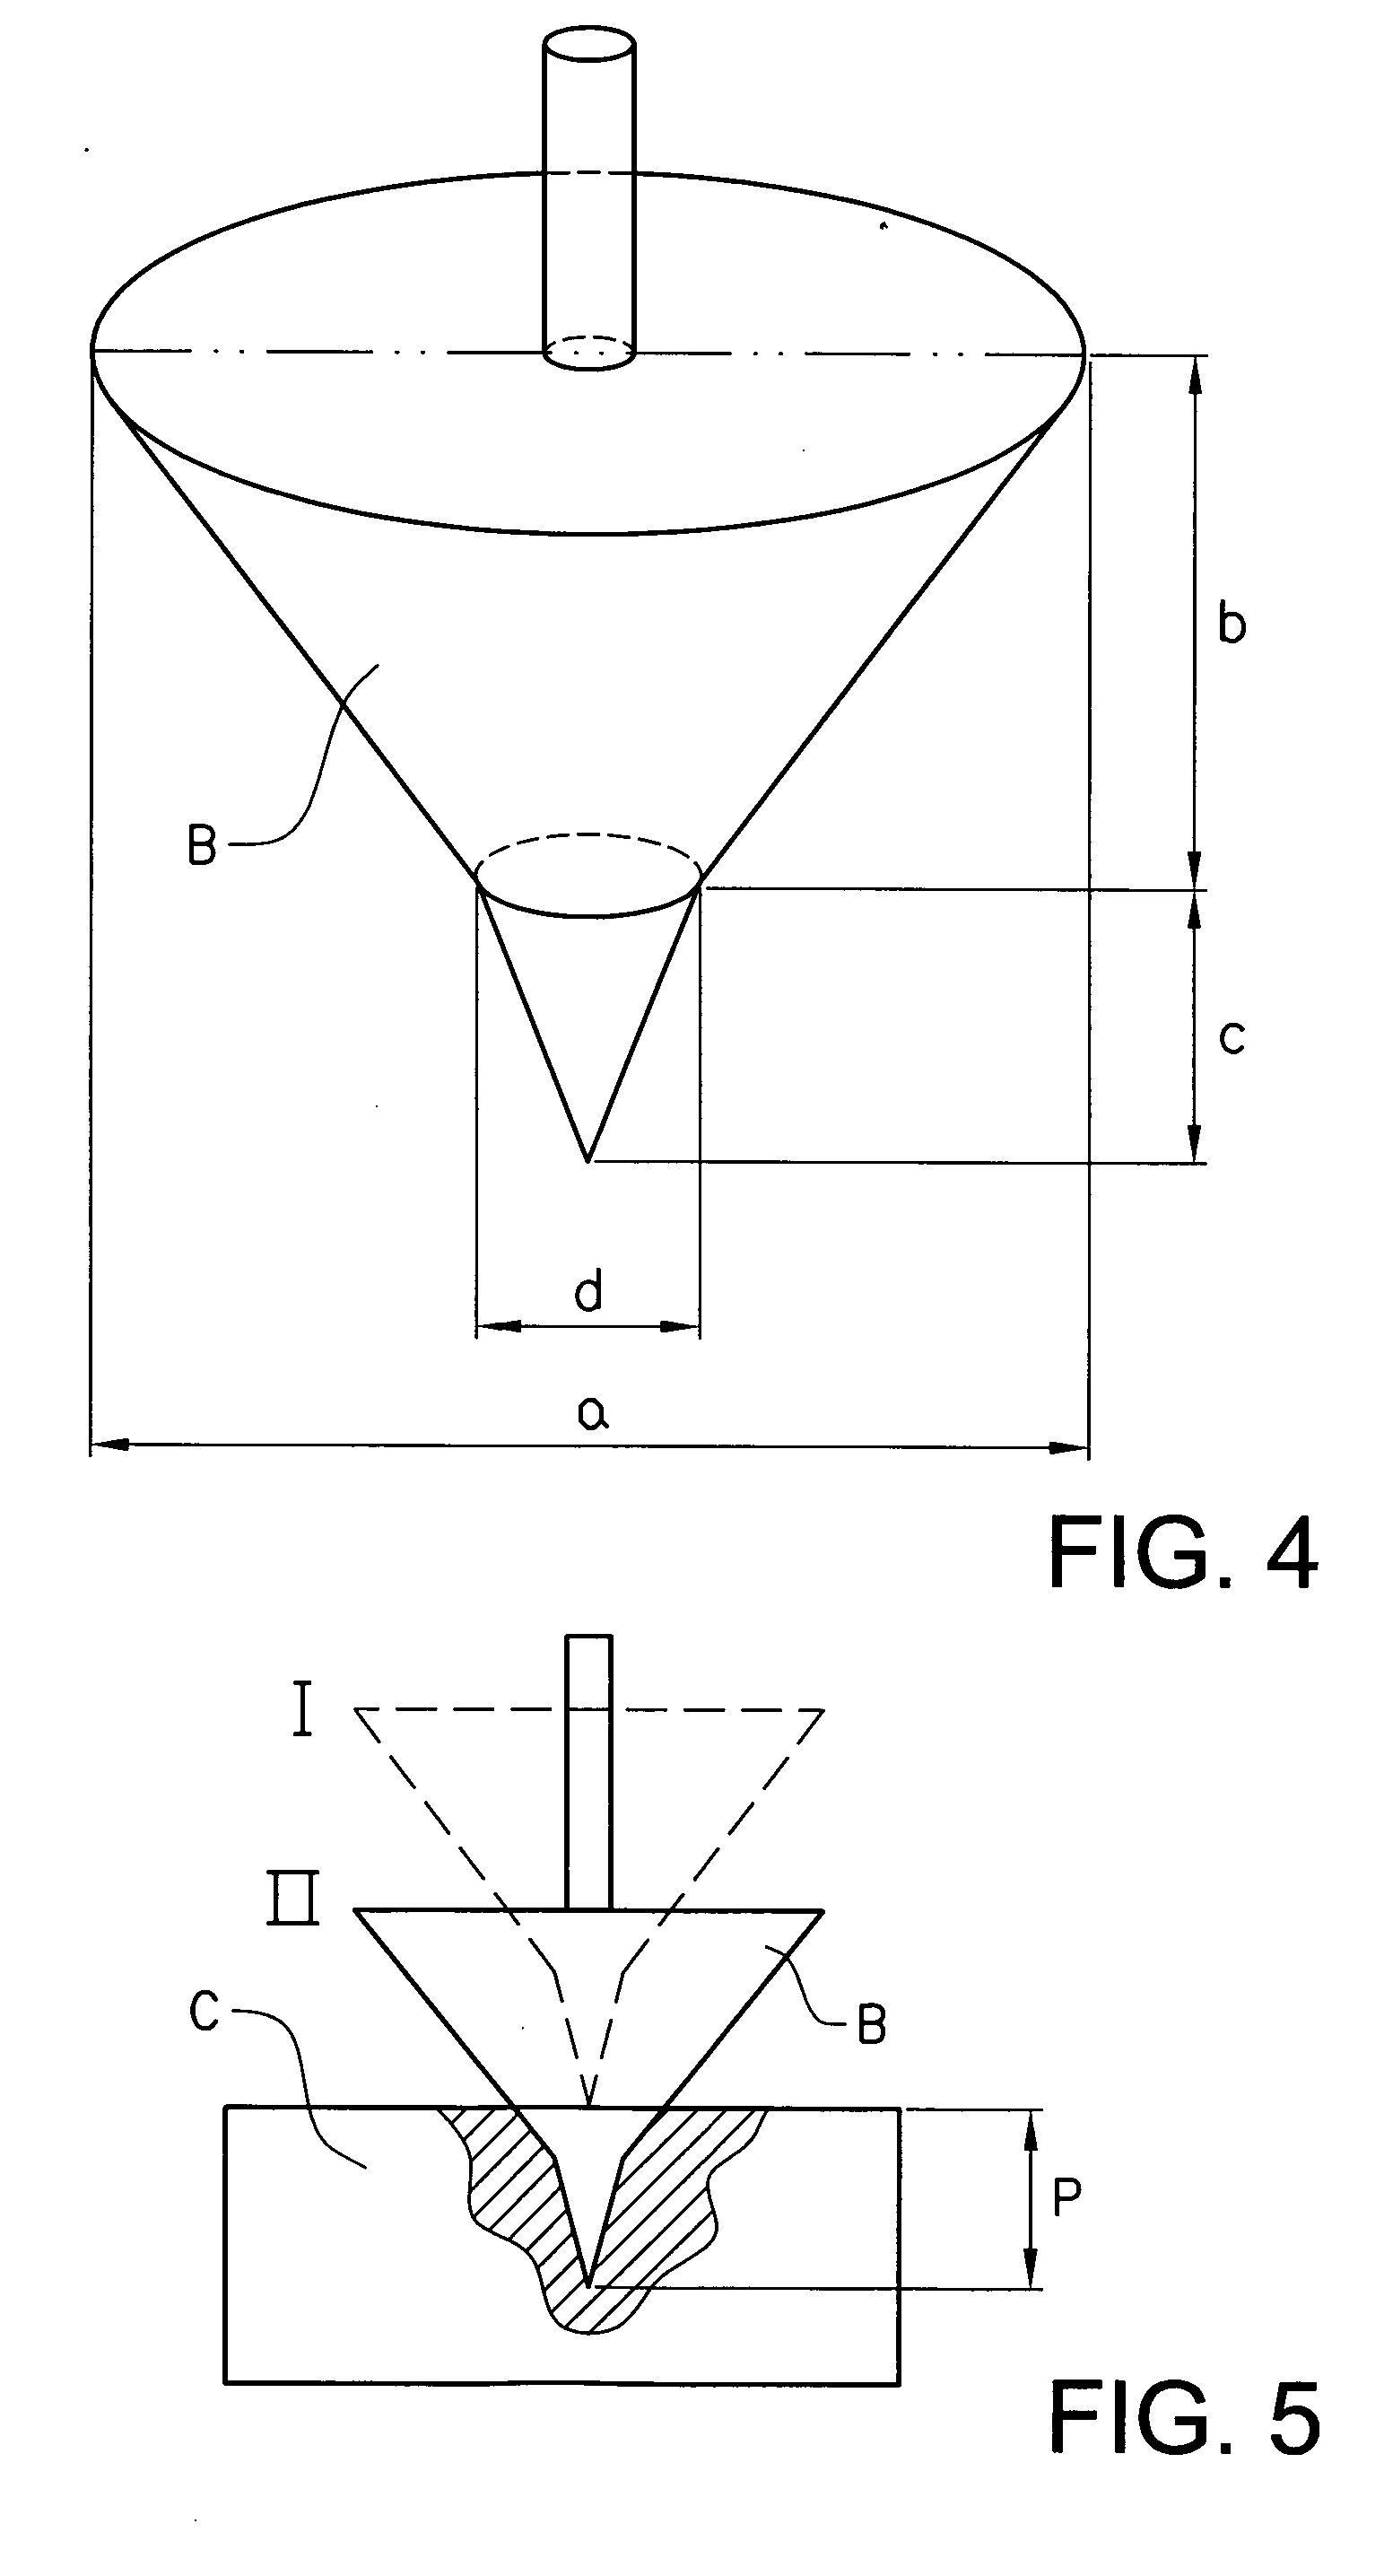 Component for securing attachment of a medical device to skin